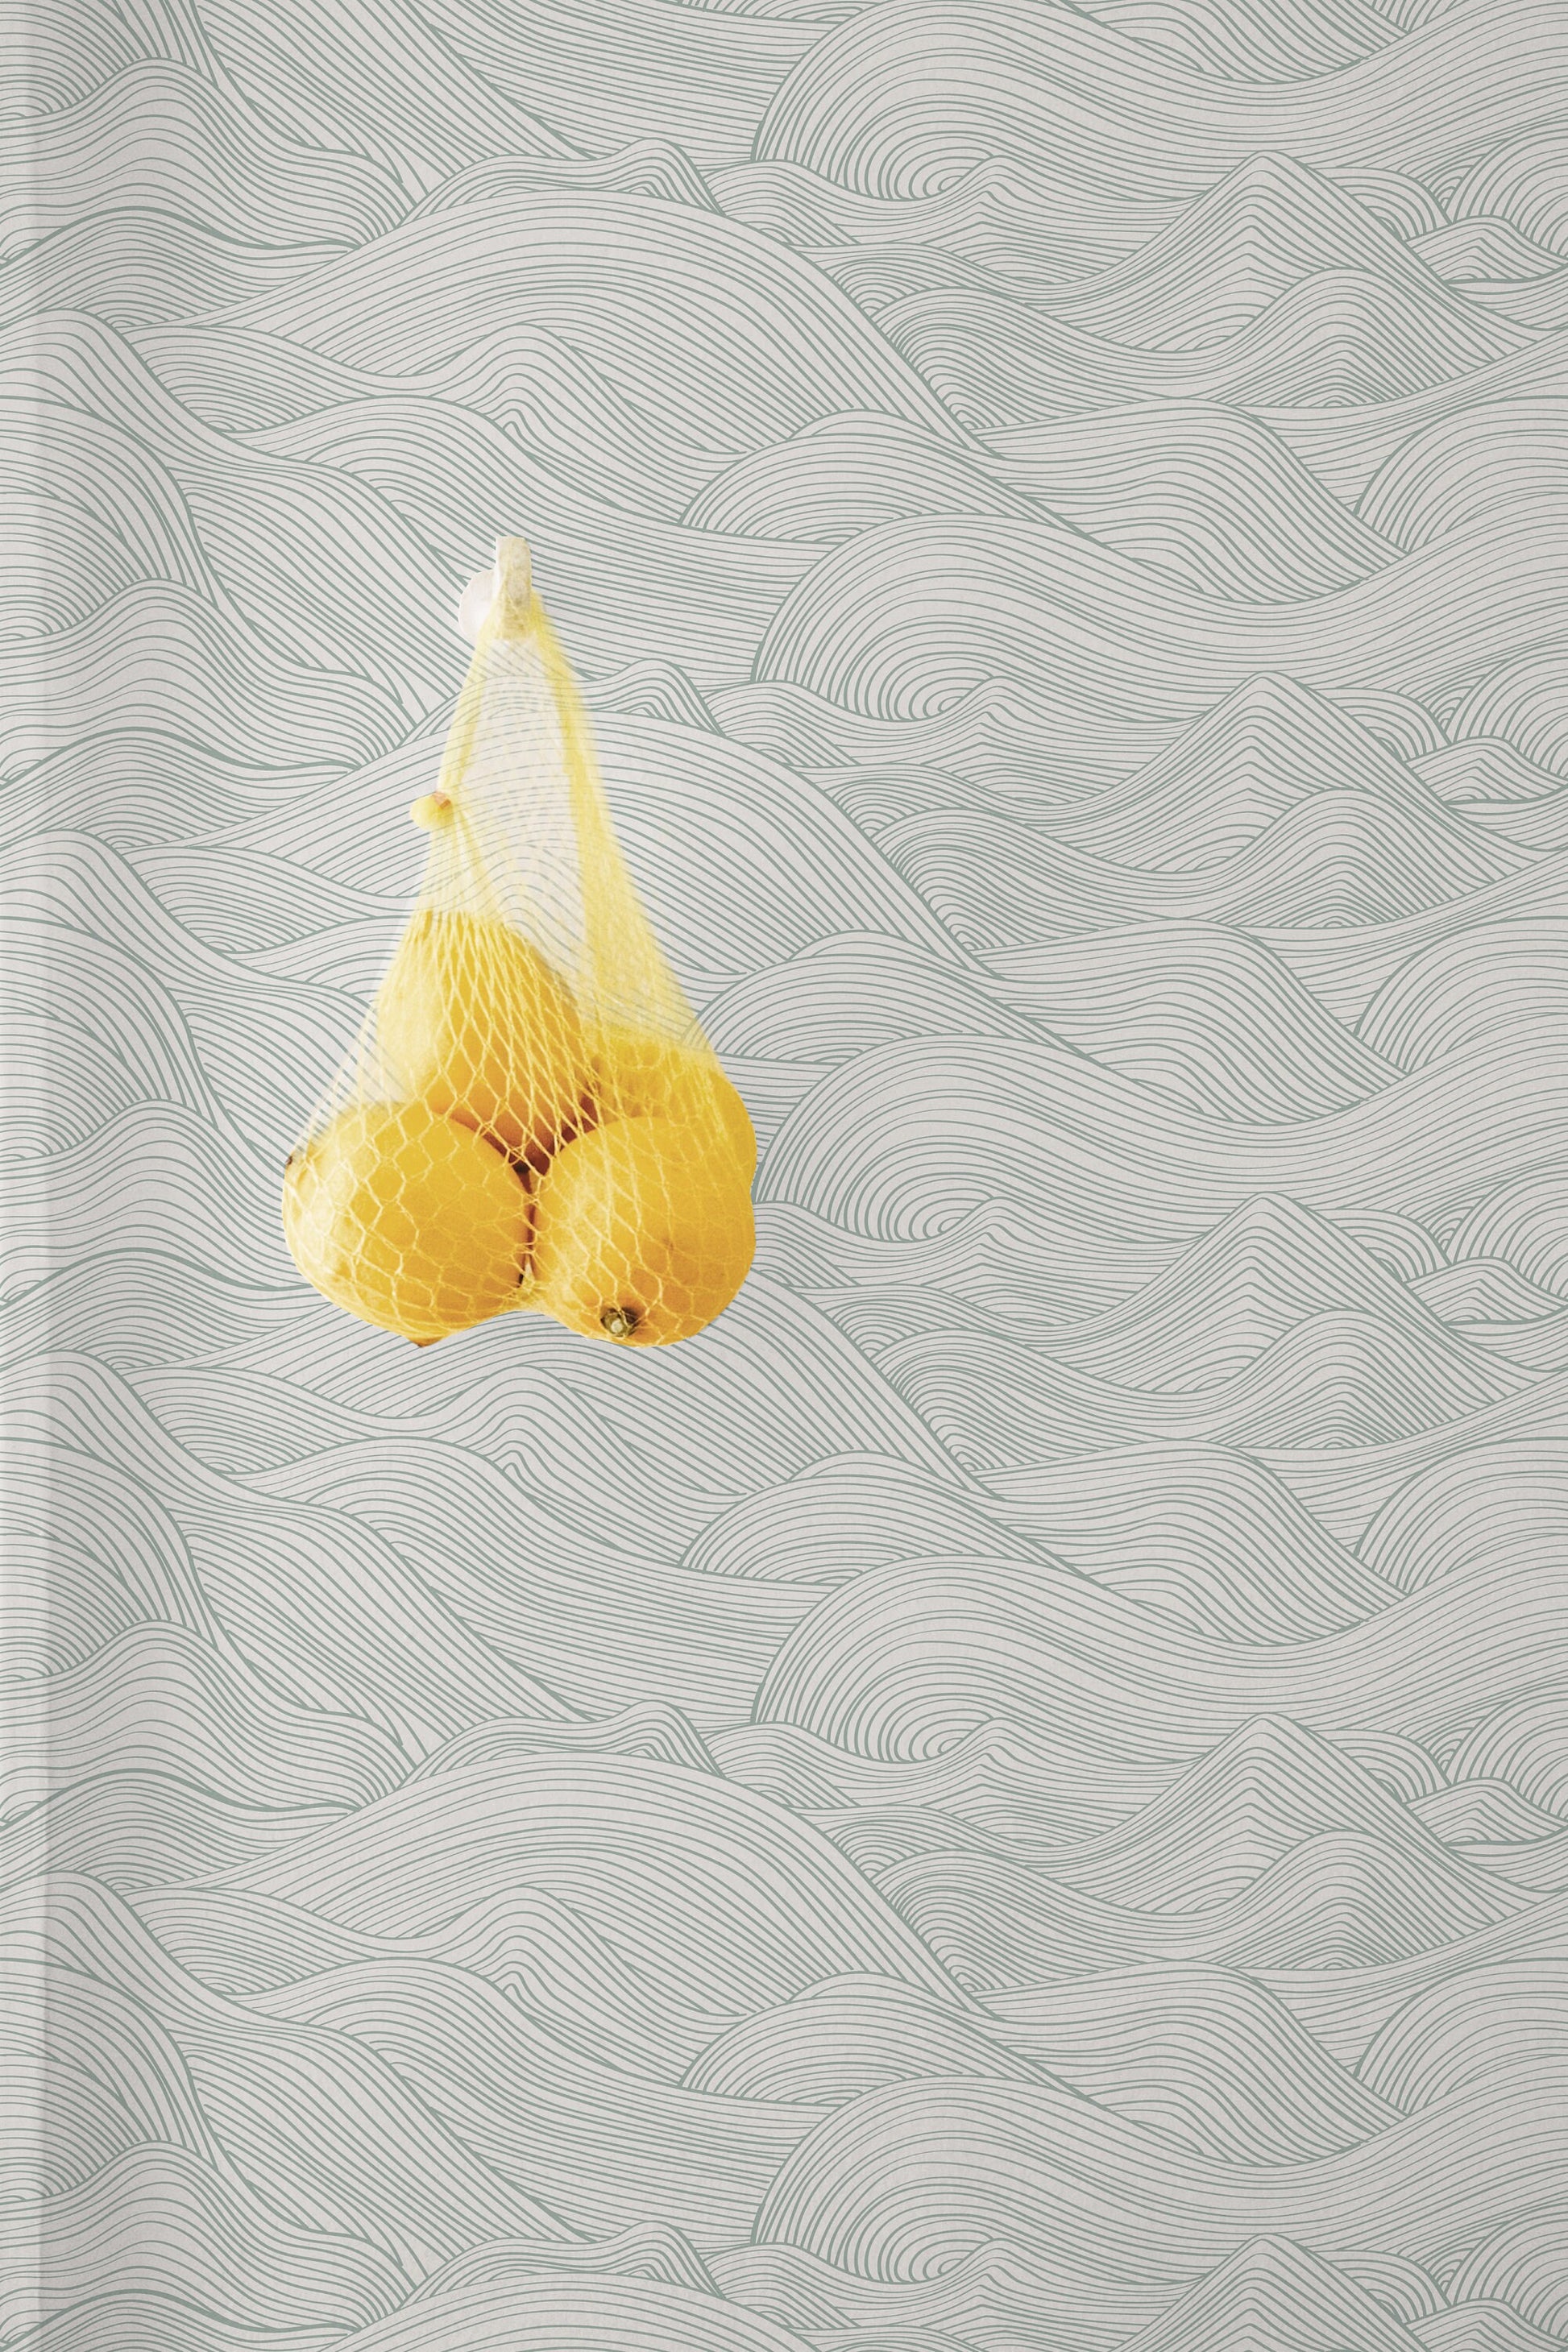 a yellow fruit hanging from a hook on a wall